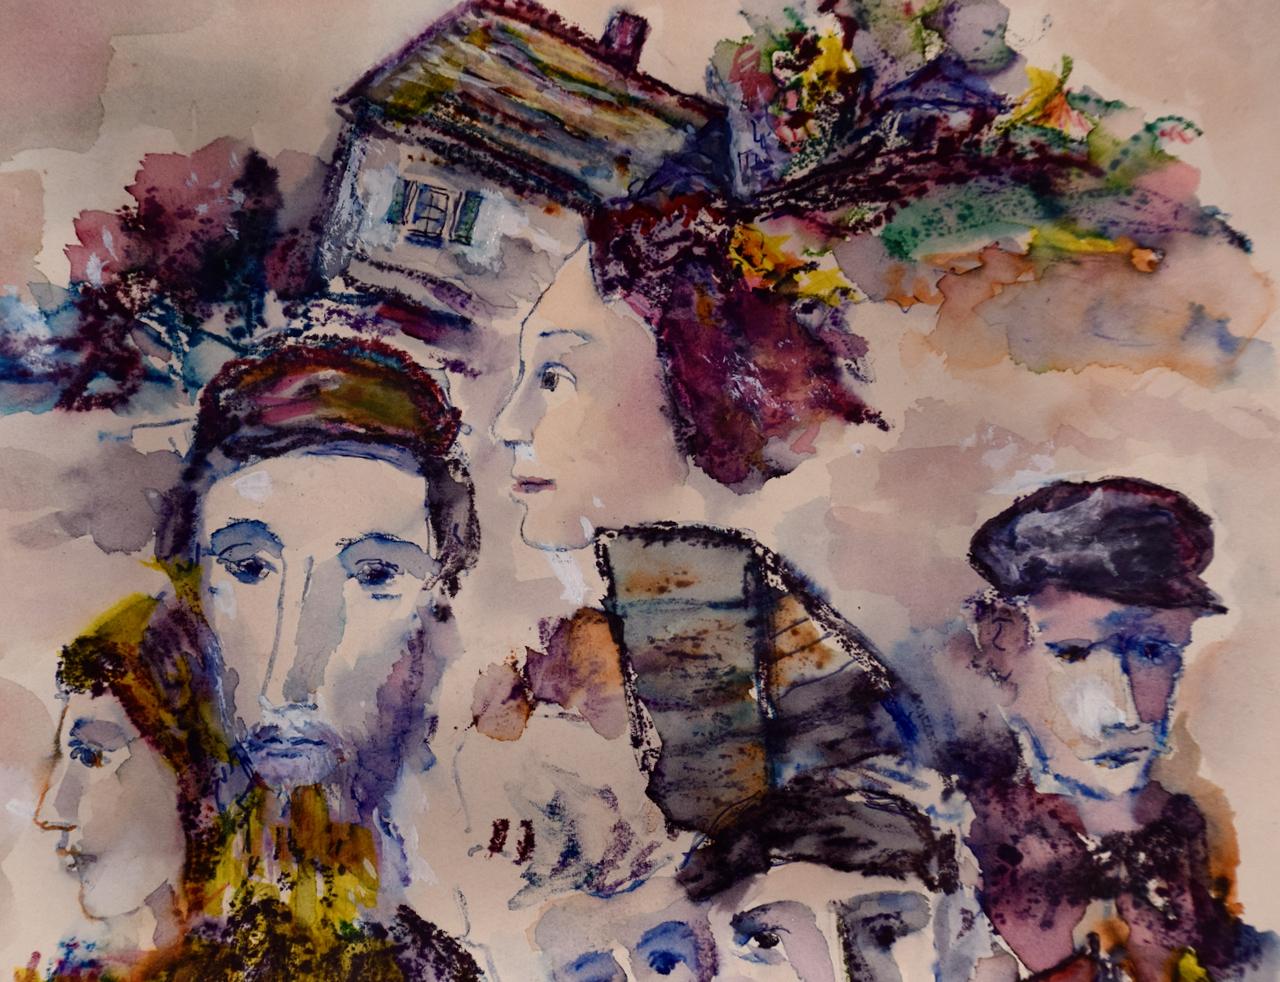 This is an original colorful figurative/abstract style watercolor and oil painting on paper by WPA artist Boris Deutsch in 1977. It is signed and dated in the right lower corner. The painting depicts the heads of eight people in front of a village,